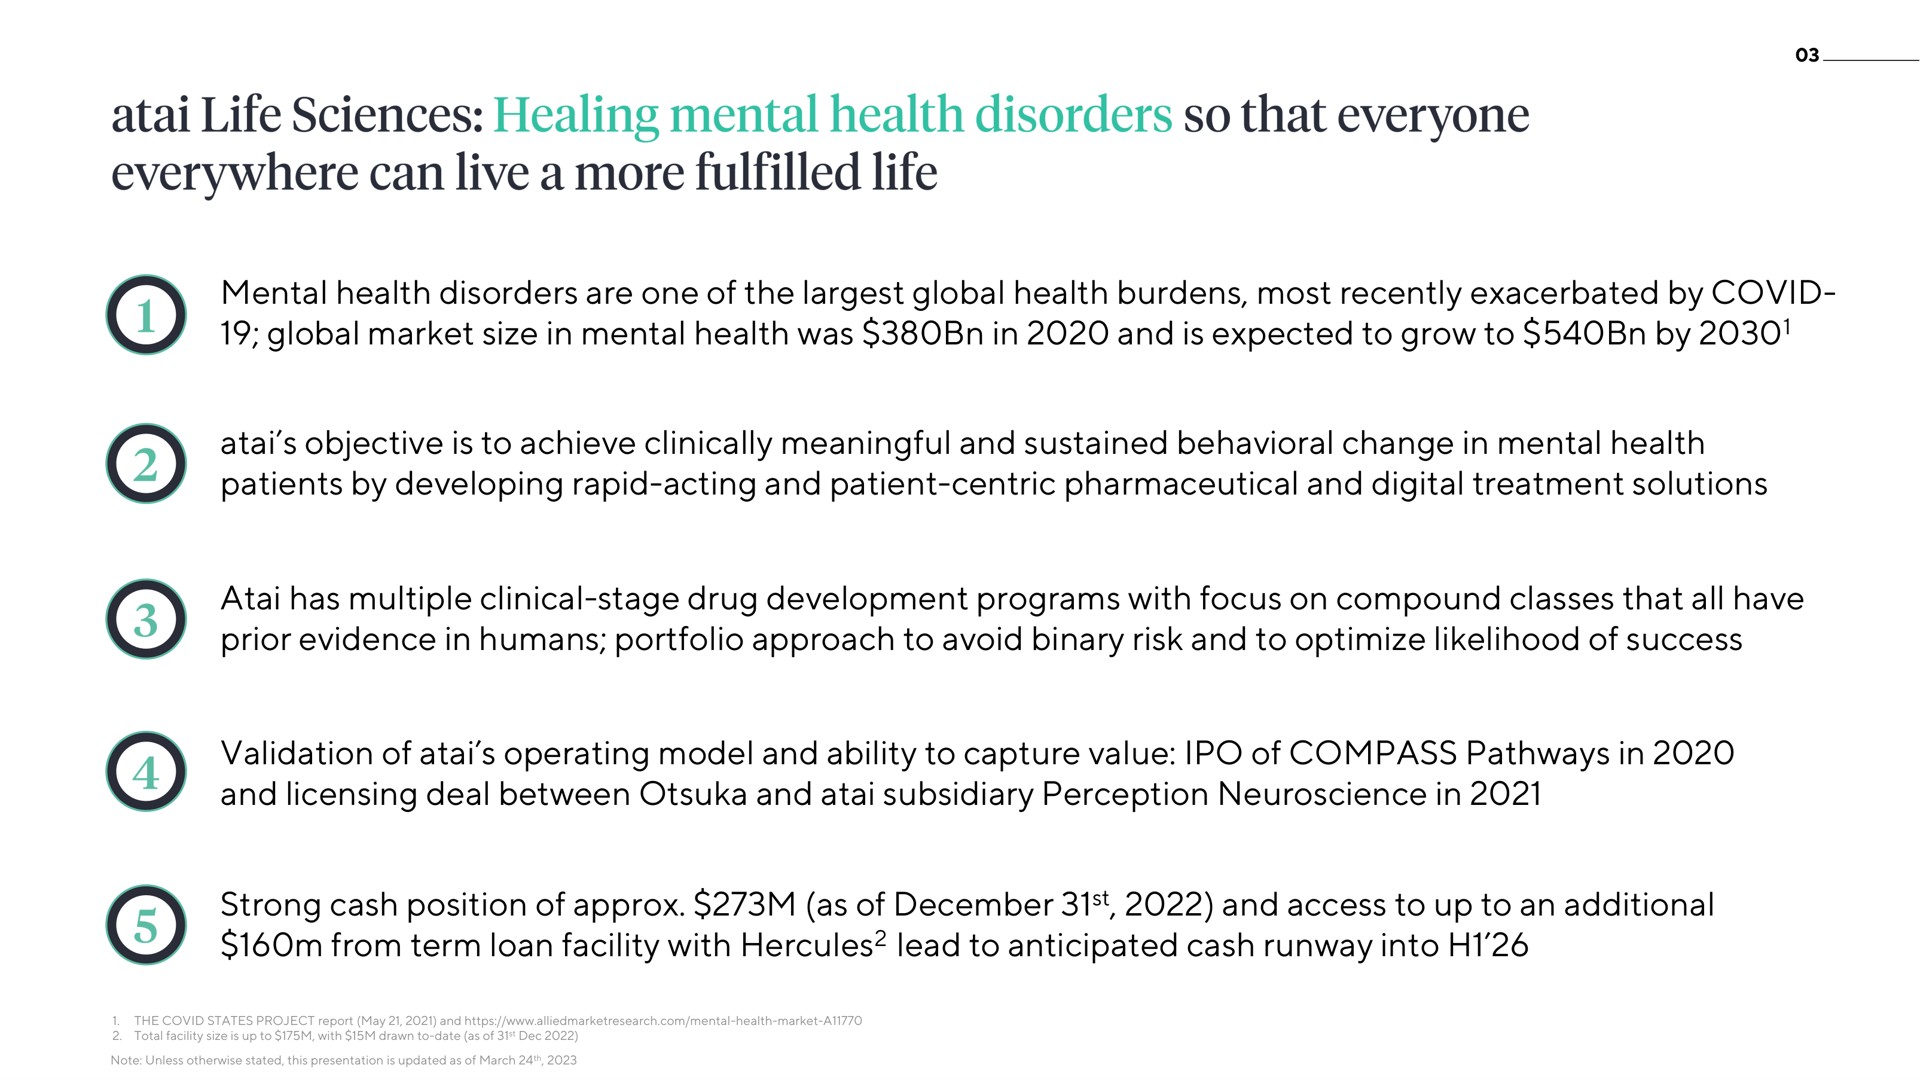 mental health disorders are one of the global health burdens most recently exacerbated by covid global market size in mental health was in and is expected to grow to by objective is to achieve clinically meaningful and sustained behavioral change in mental health patients by developing rapid acting and patient centric pharmaceutical and digital treatment solutions has multiple clinical stage drug development programs with focus on compound classes that all have prior evidence in humans portfolio approach to avoid binary risk and to optimize likelihood of success validation of operating model and ability to capture value of compass pathways in and licensing deal between and subsidiary perception in strong cash position of as of and access to up to an additional from term loan facility with lead to anticipated cash runway into life sciences healing everywhere can live a more life so everyone | ATAI